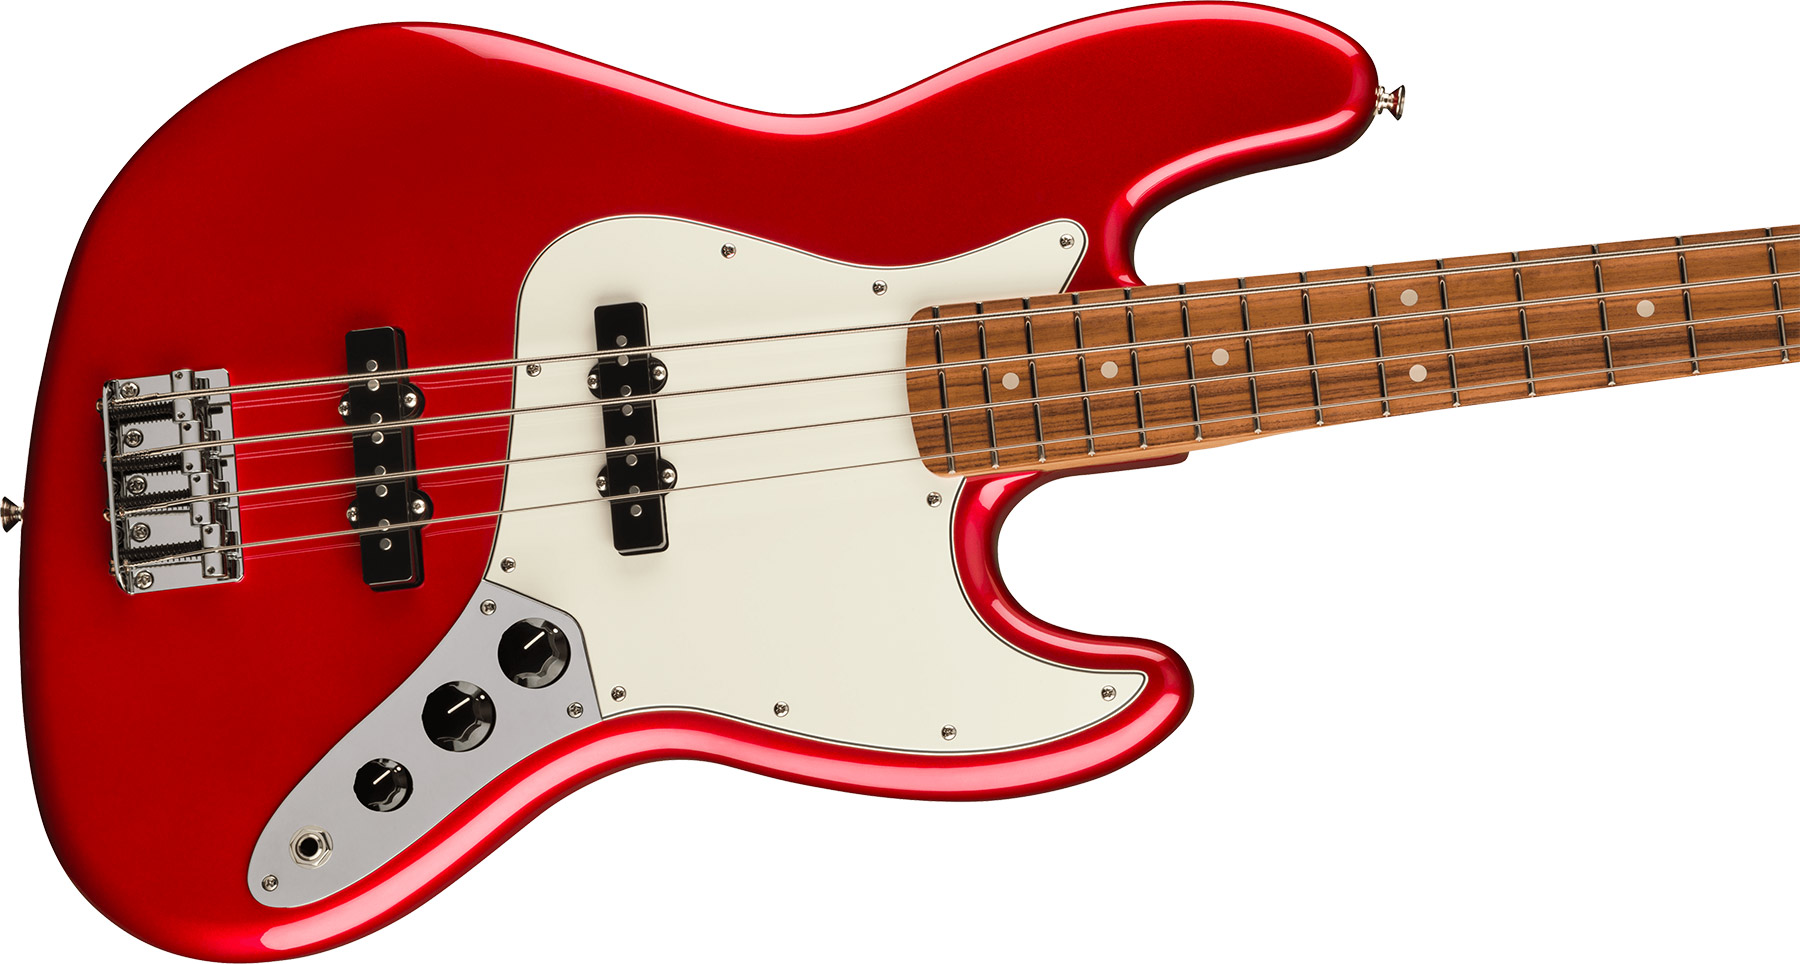 Fender Jazz Bass Player Mex 2023 Pf - Candy Apple Red - Basse Électrique Solid Body - Variation 2